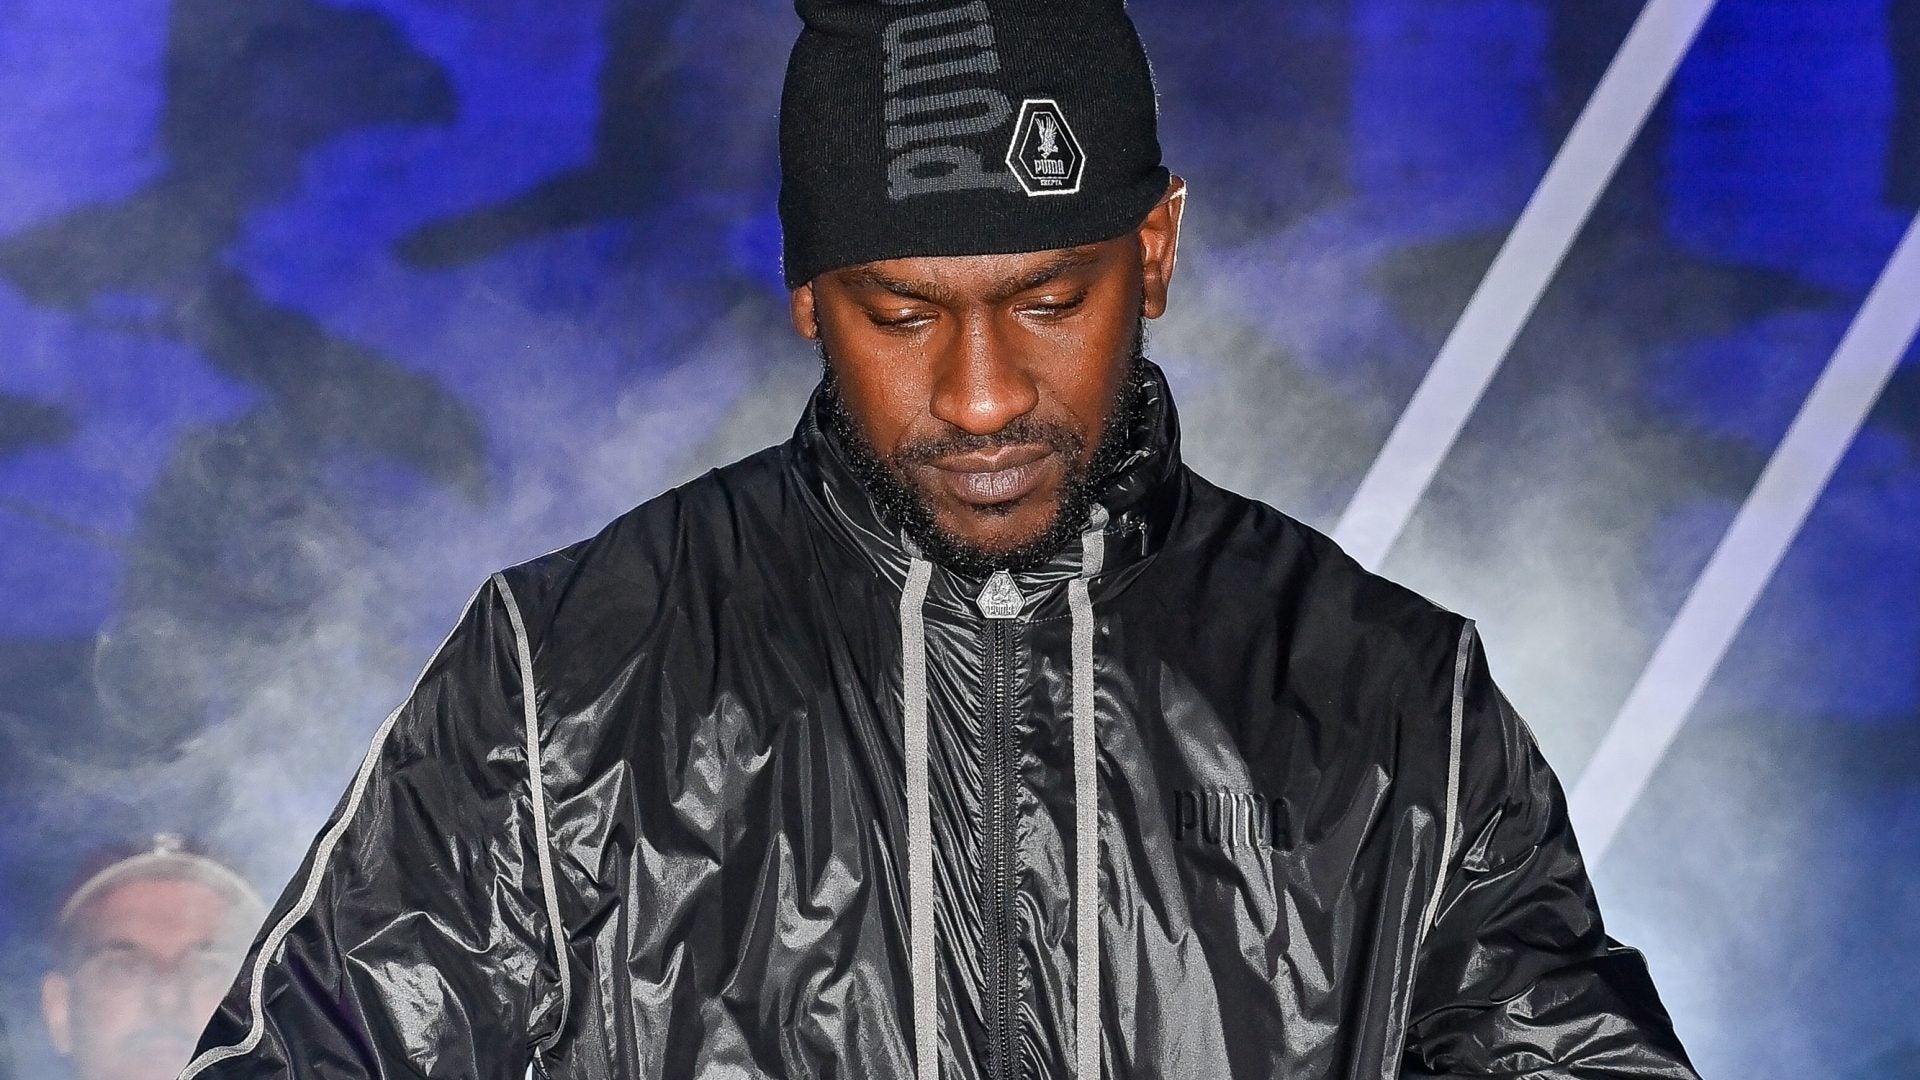 In Case You Missed It: Skepta And Puma Collaboration Launch, Wales Bonner's New Collection, And More